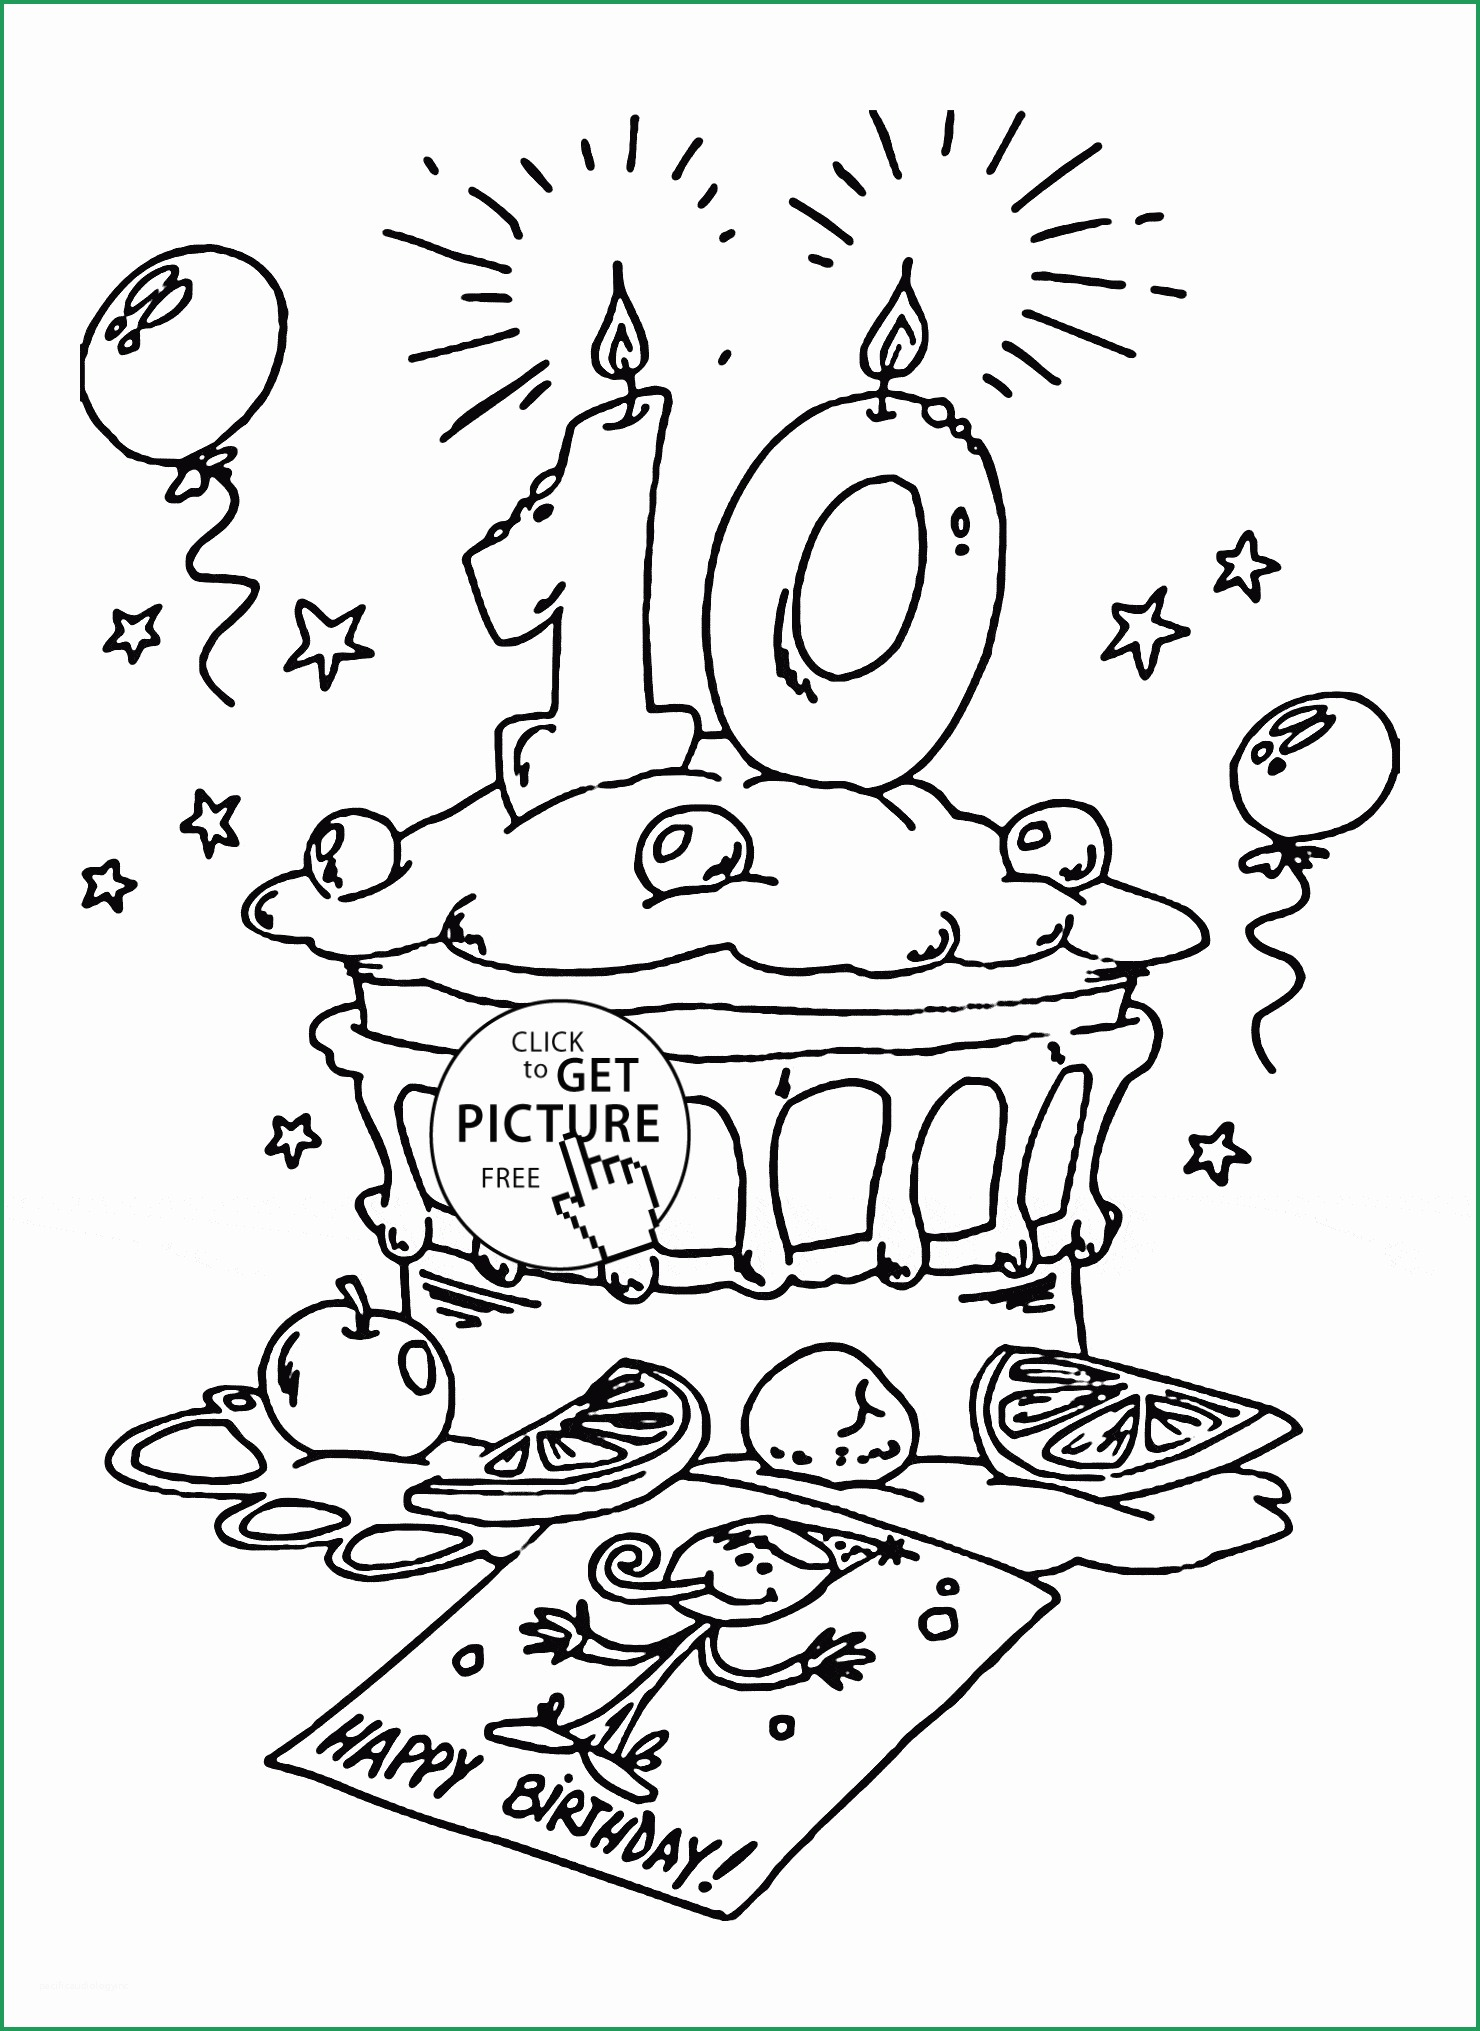 Happy Birthday Coloring Pages To Print Coloring Ideas Printable Birthday Coloring Pages Ideas Awesome